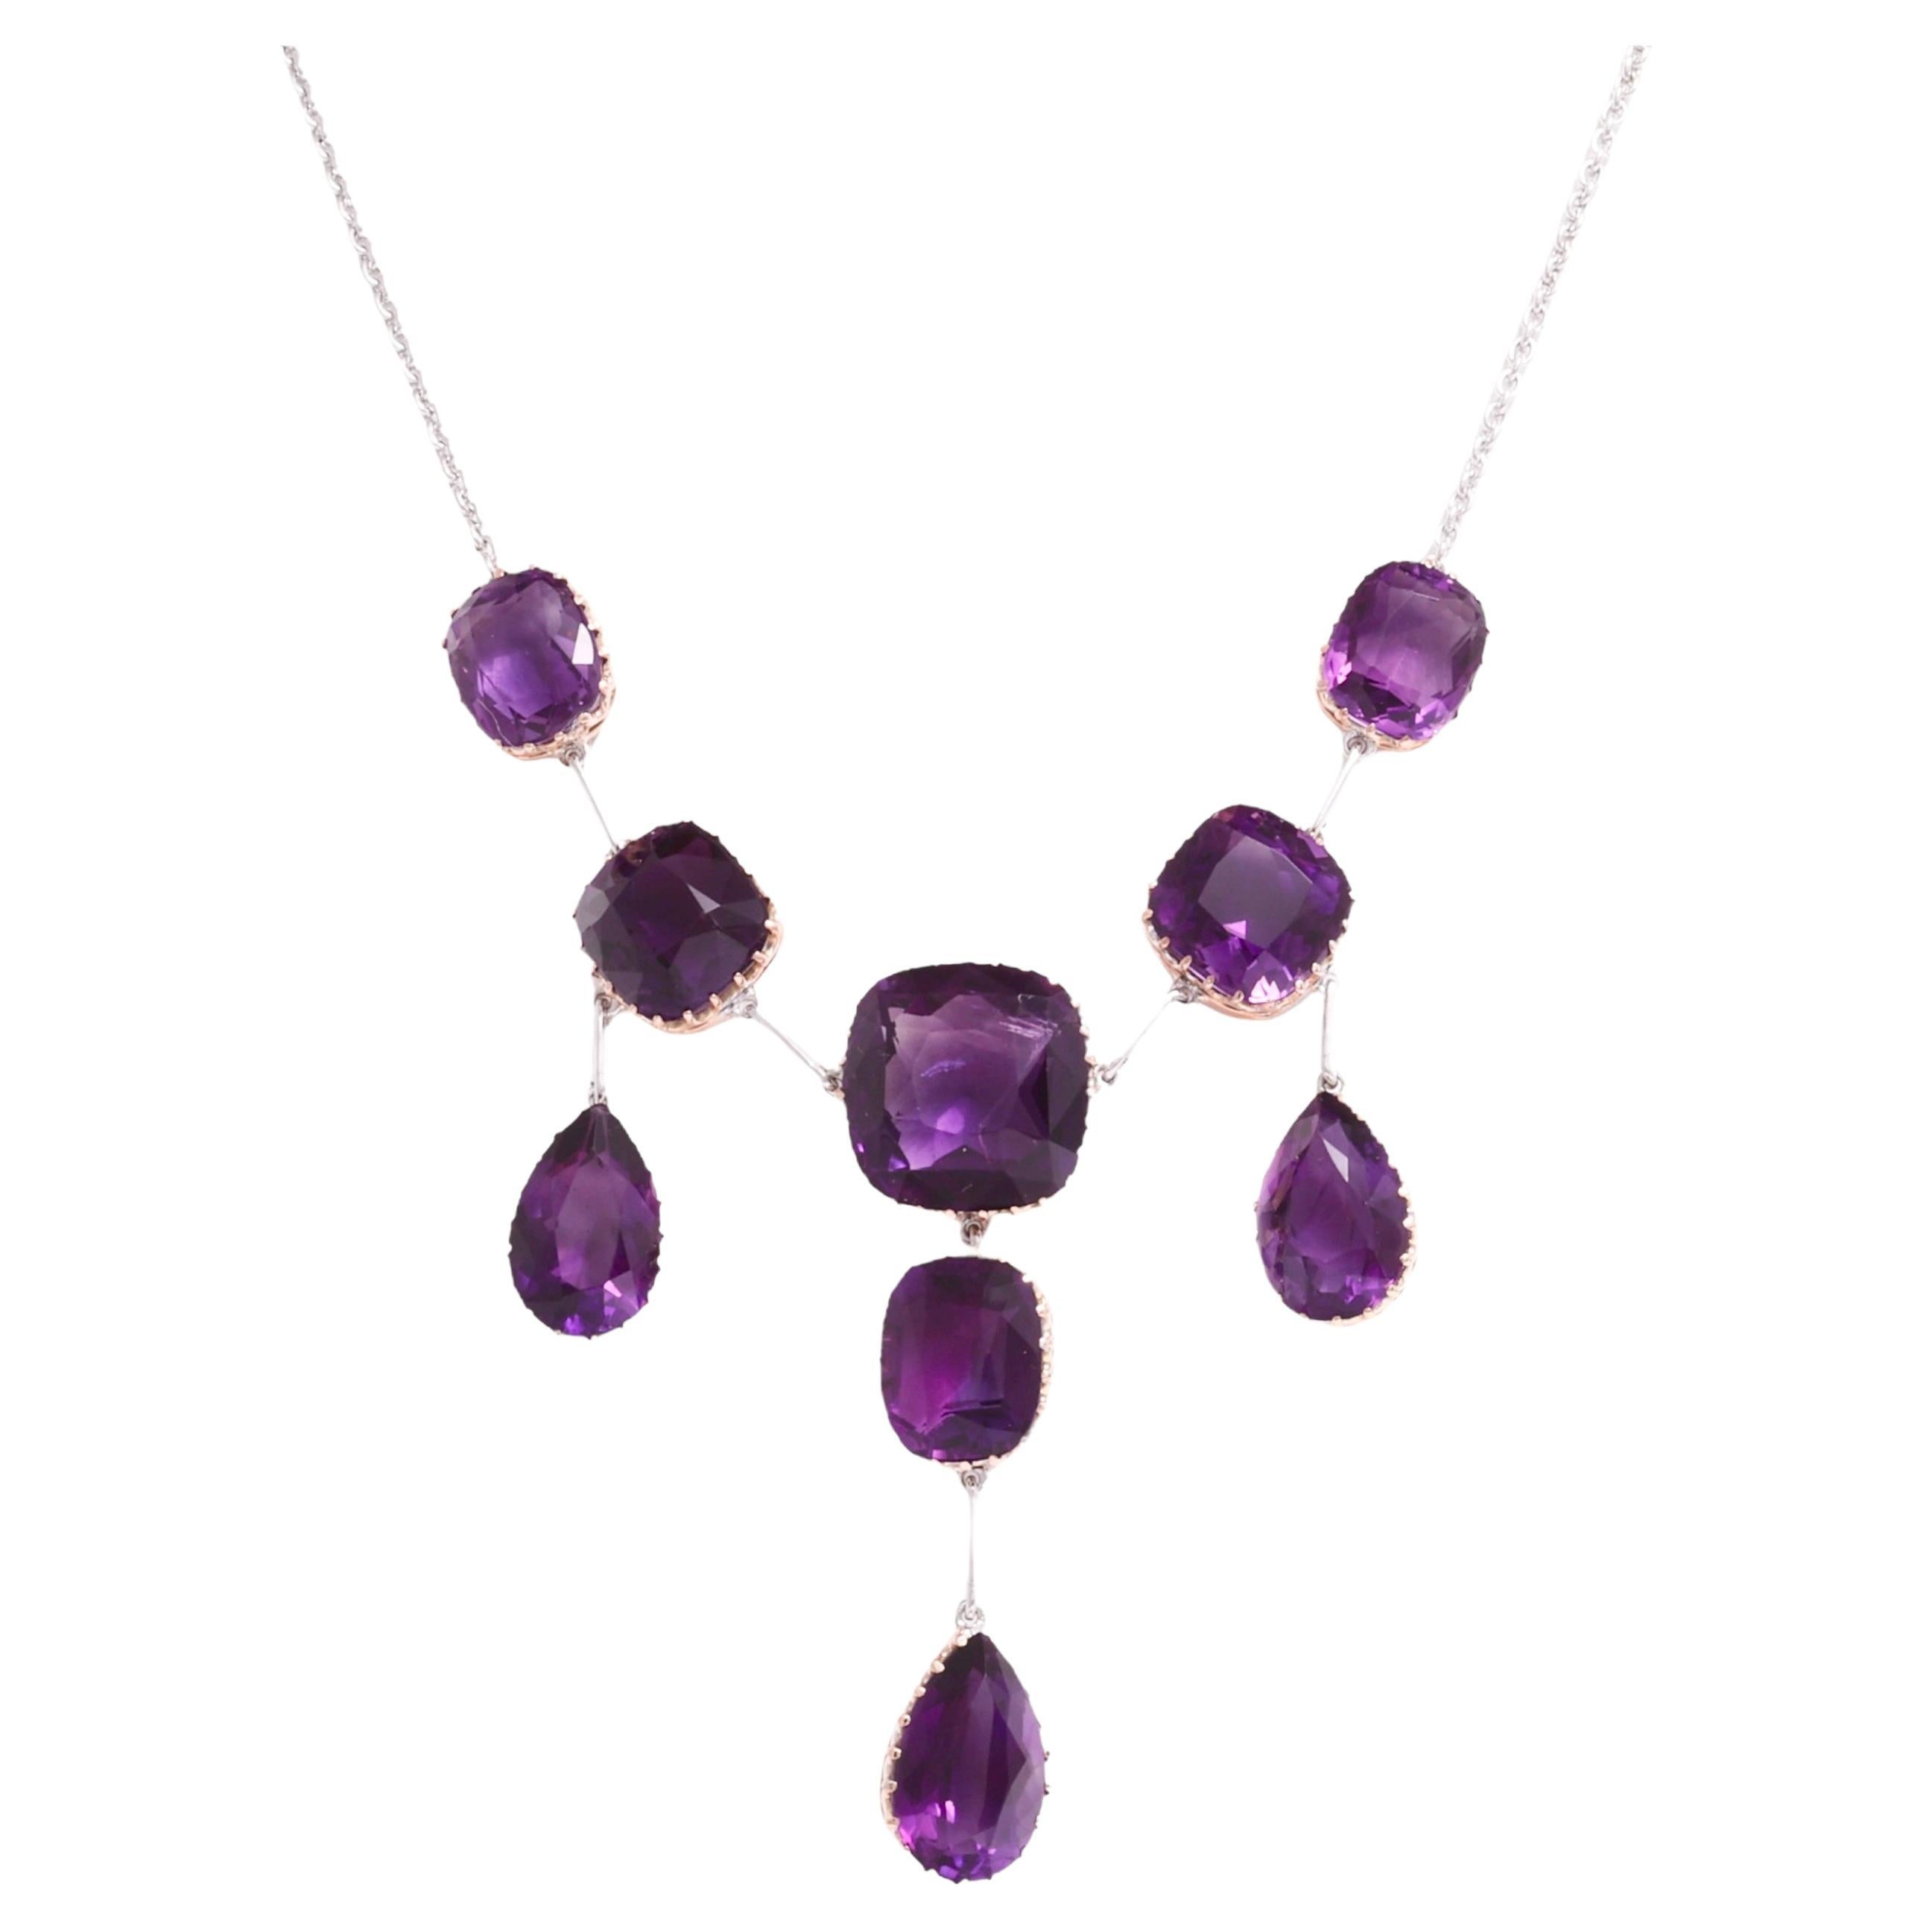 Gorgeous Platinum / Gold Chandelier Drop Necklace With 55 ct. Amethyst Gemstones For Sale